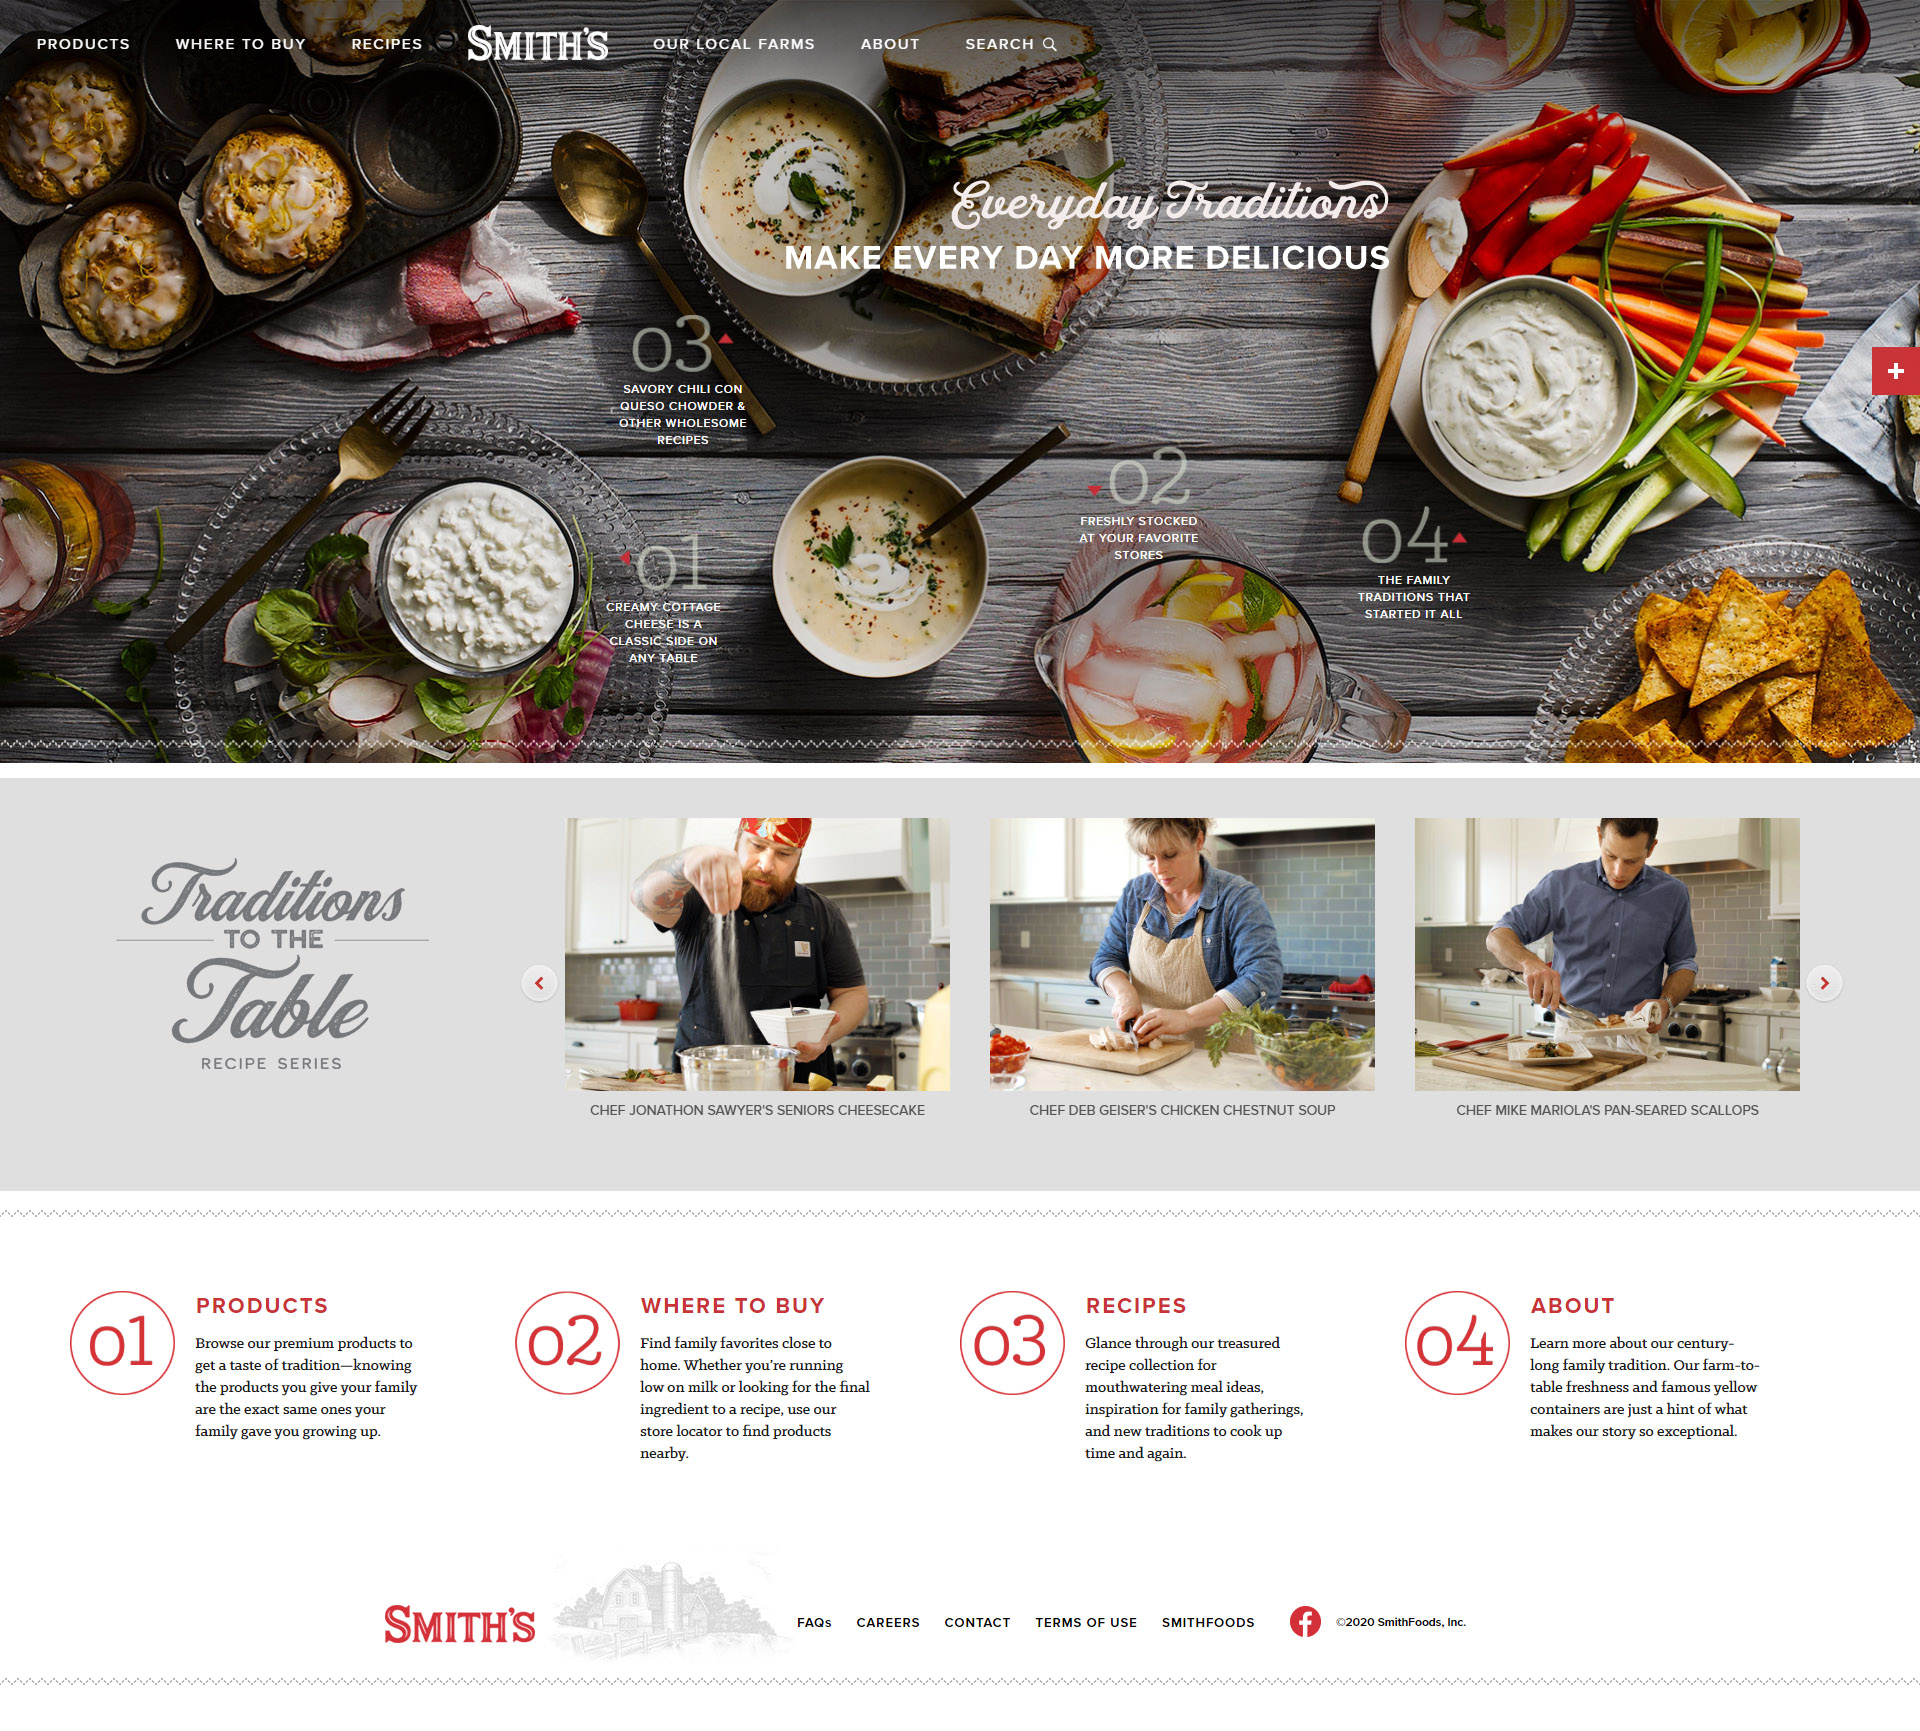 Previous Food Industry Website Design Example